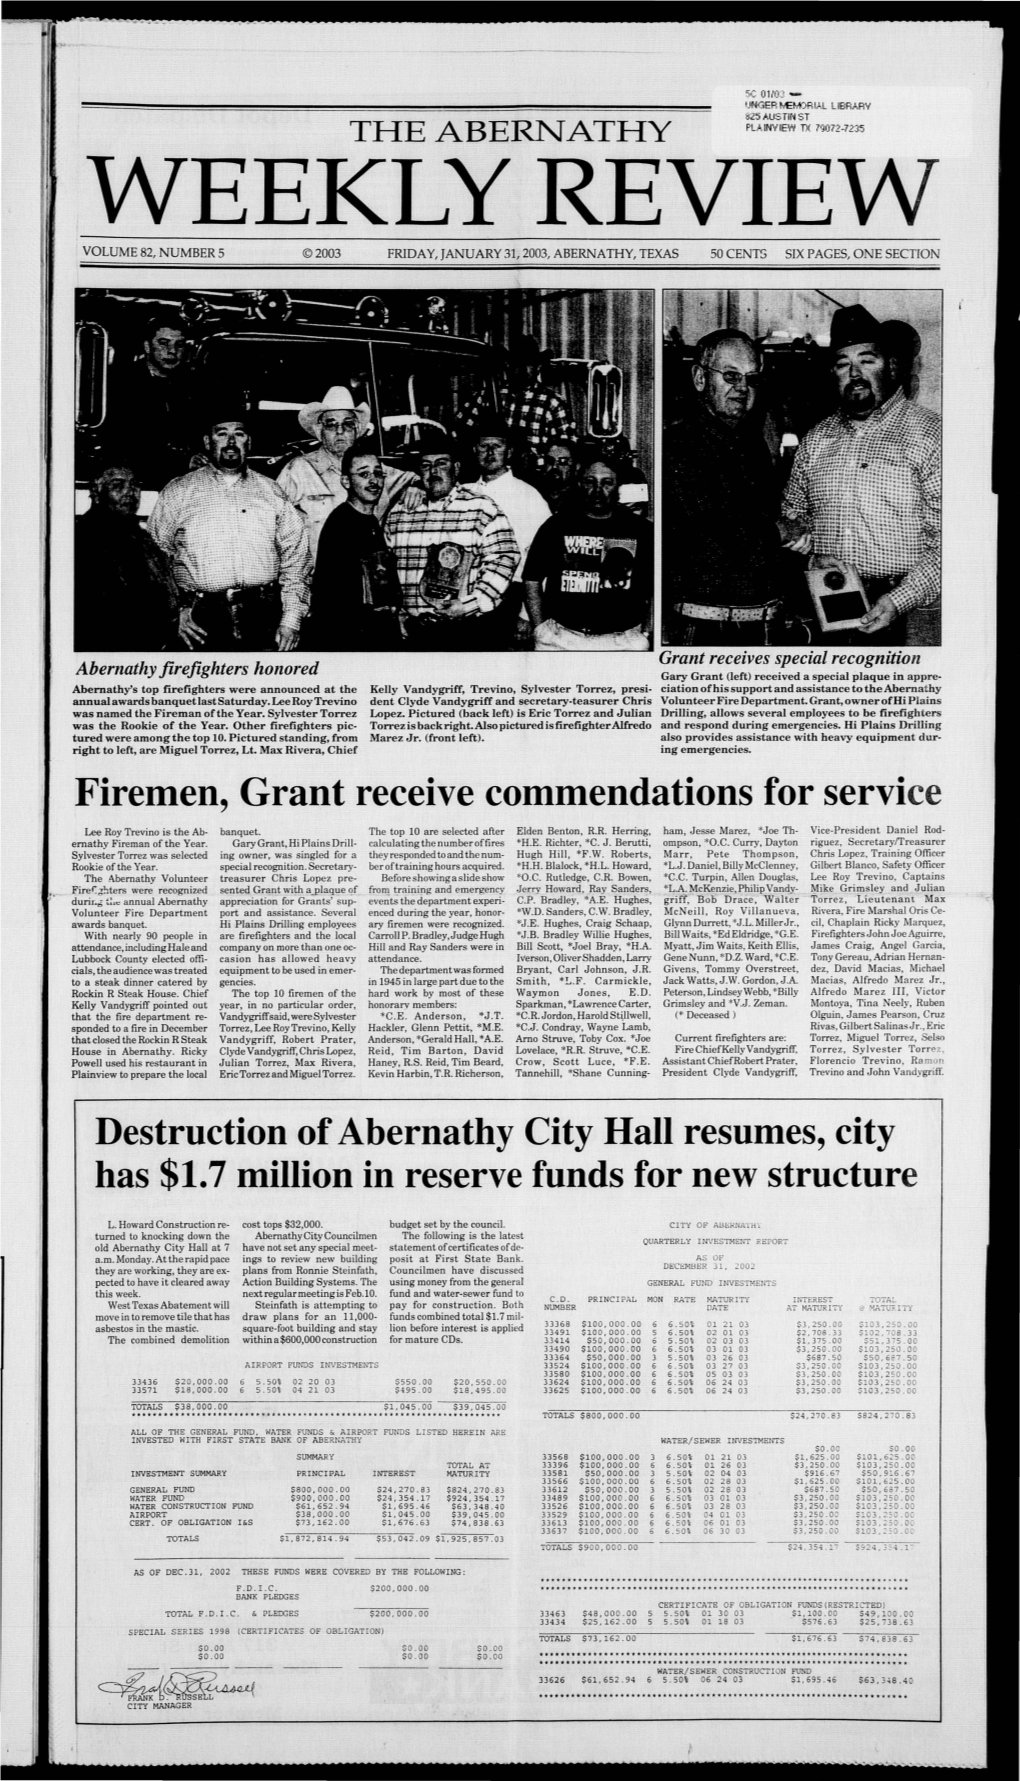 Weekly Review ' Volume 82, Number 5 ©2003 Friday, January 31, 2003, Abernathy, Texas 50 Cents Six Pages, One Section